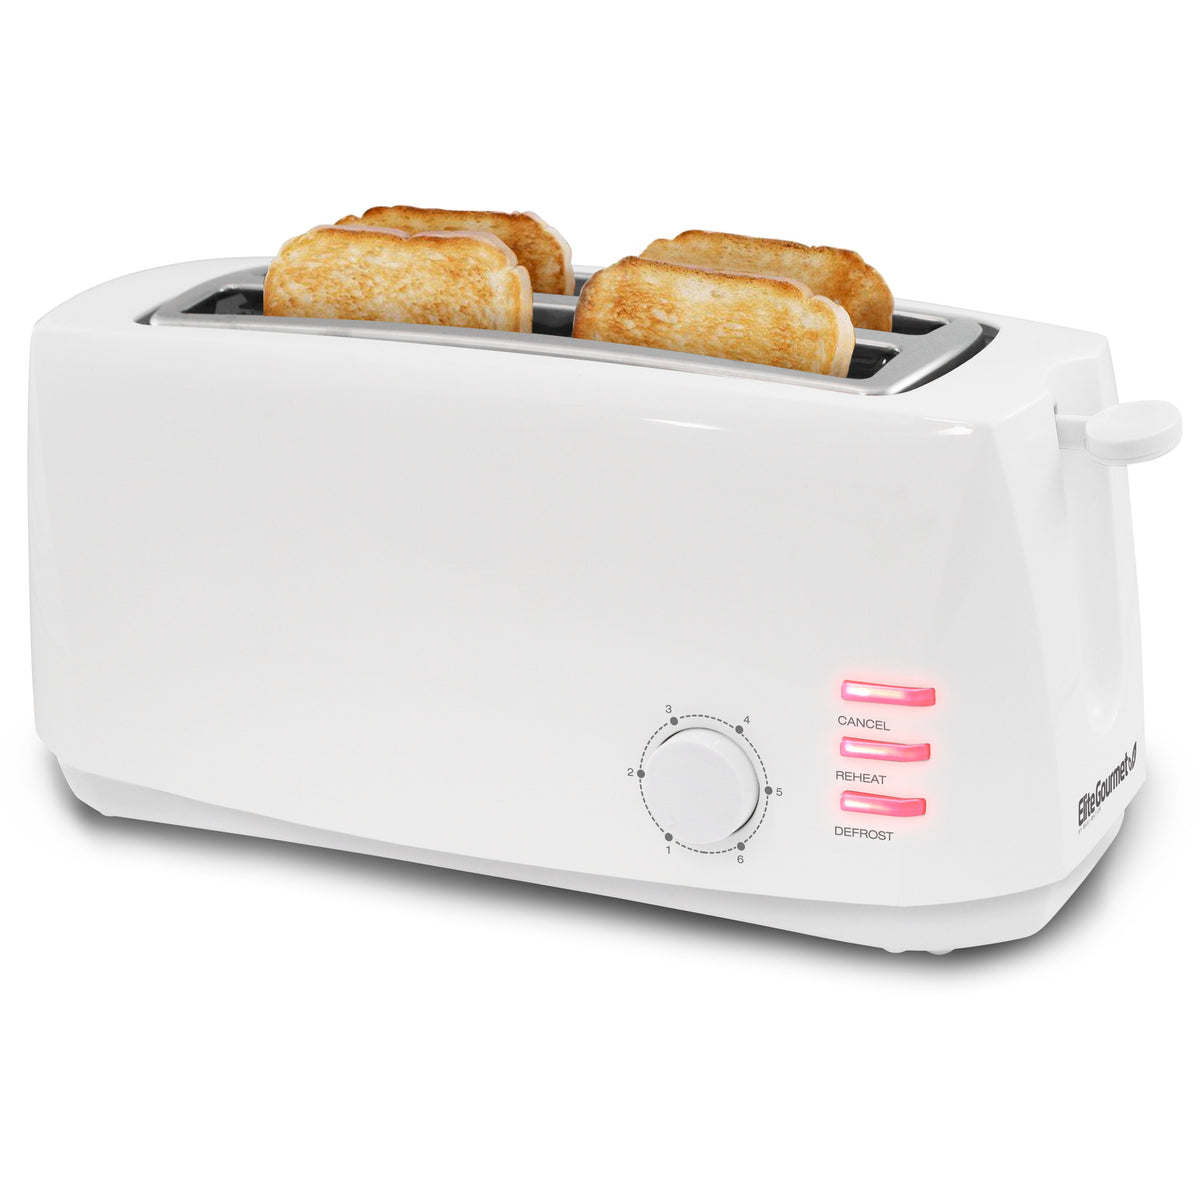 Elite Gourmet ECT118B Cool Touch Single Slice Toaster, 6 Toasting Black